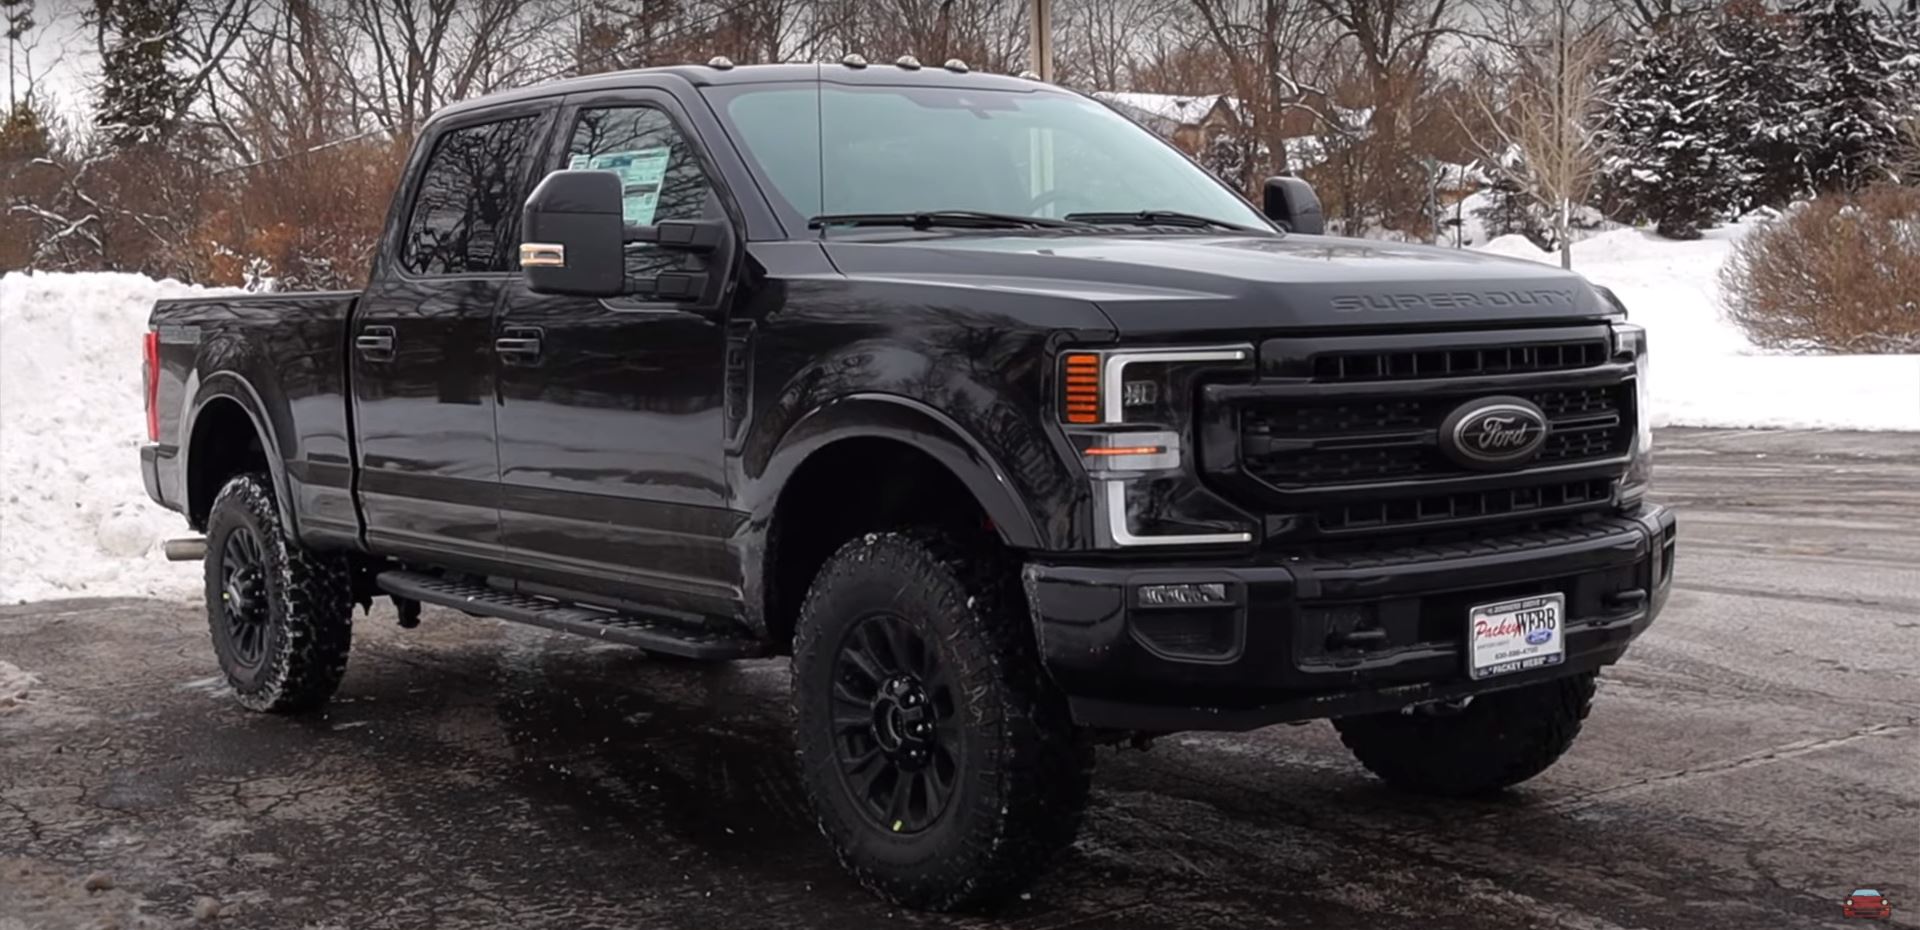 2021 Ford F250 Lariat Tremor Gets Reviewed, Feels Like a Mansion on